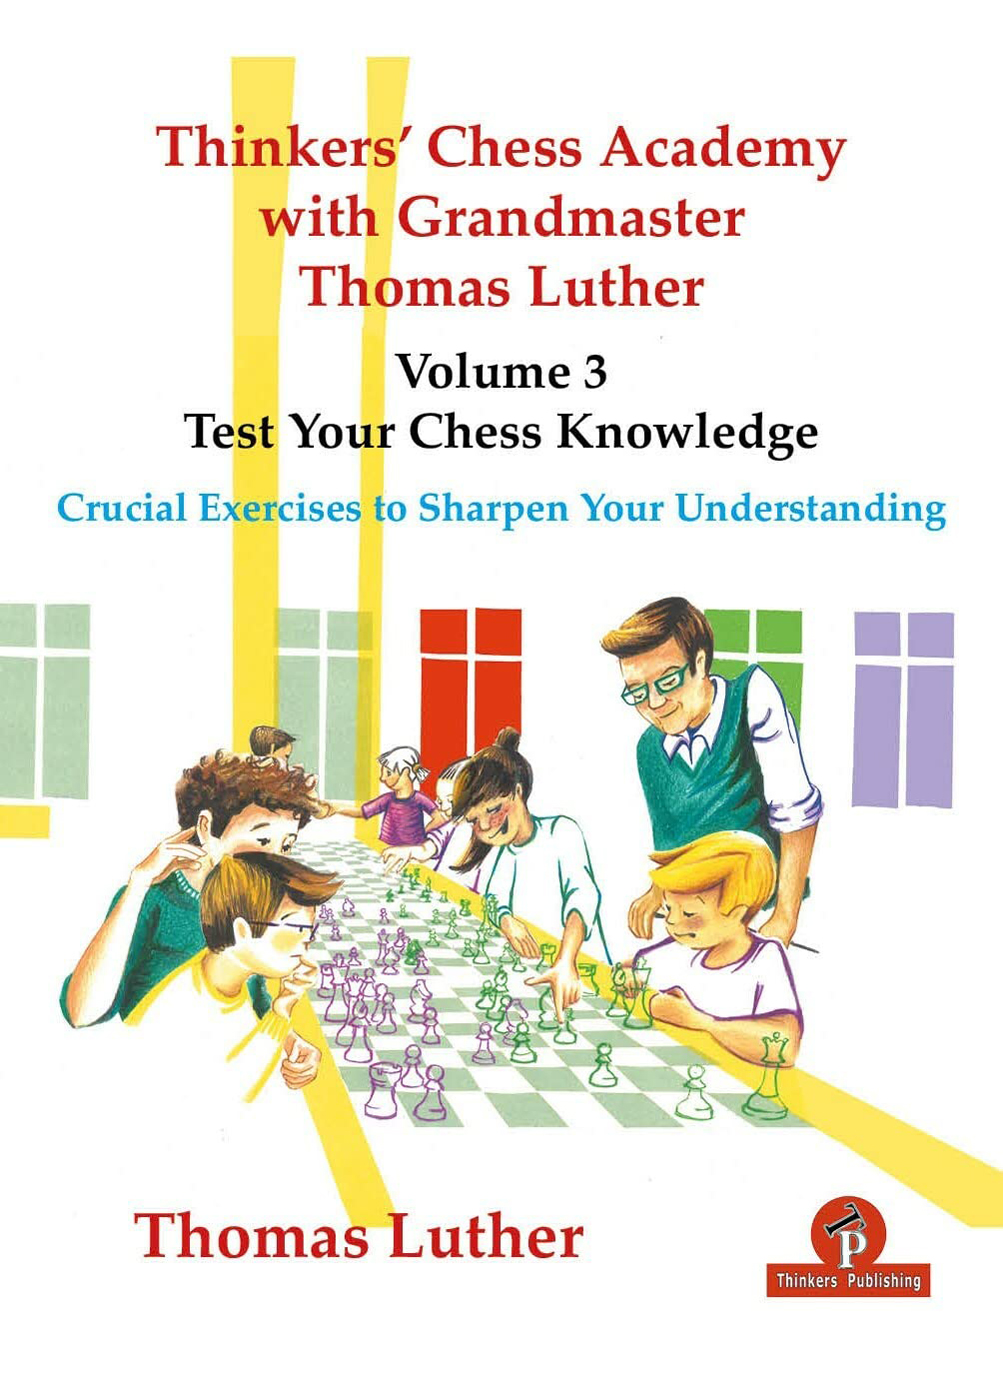 Thinkers' Chess Academy with Grandmaster Thomas Luther Vol. 3. 9789464201673